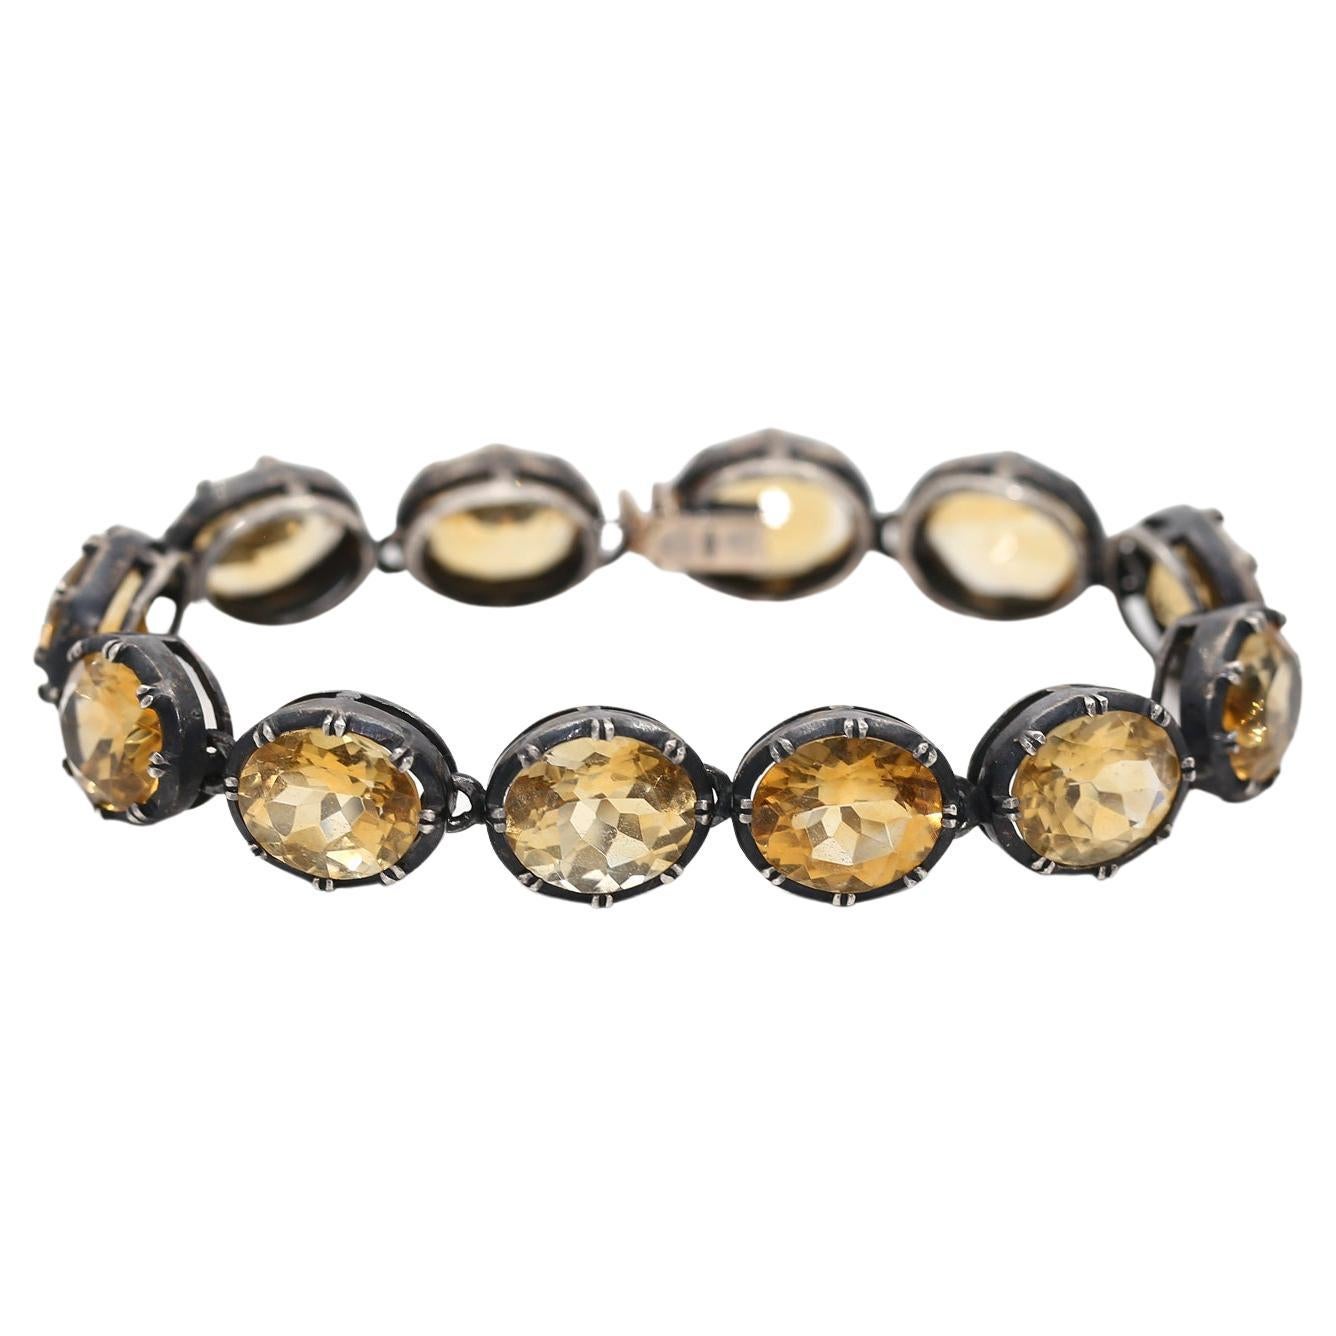 A Citrine Bracelet in 9 Karat  Yellow Gold and Silver, set with a row of oval cut citrines in pinched collet settings, stamped 375. Created at the beginning of the 20th century.

A true future classic, its value will be sure to rise as time goes by.